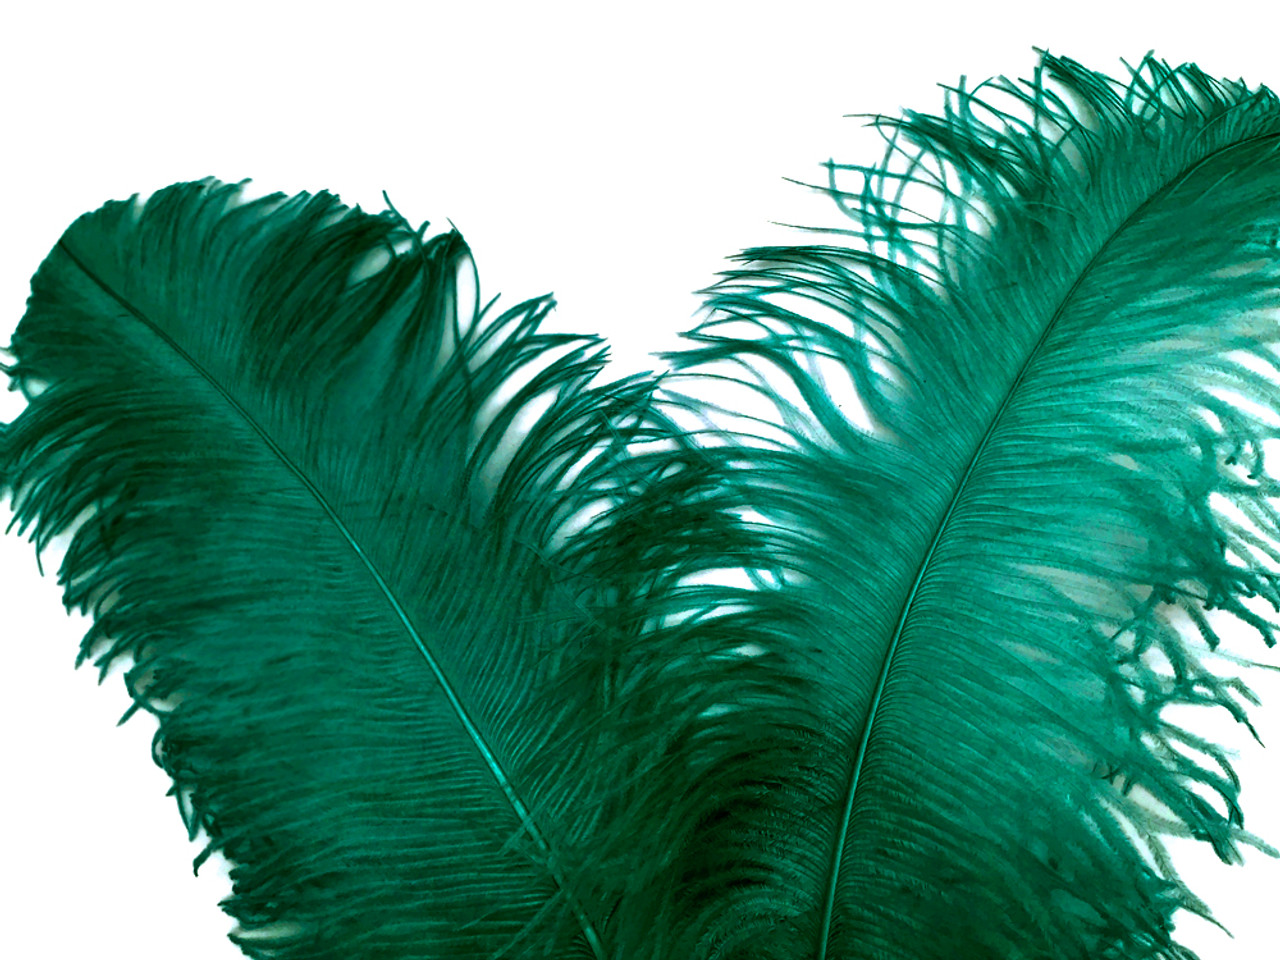 1/2lb - 25-29 Teal green Large Wing Plumes Wholesale Feather